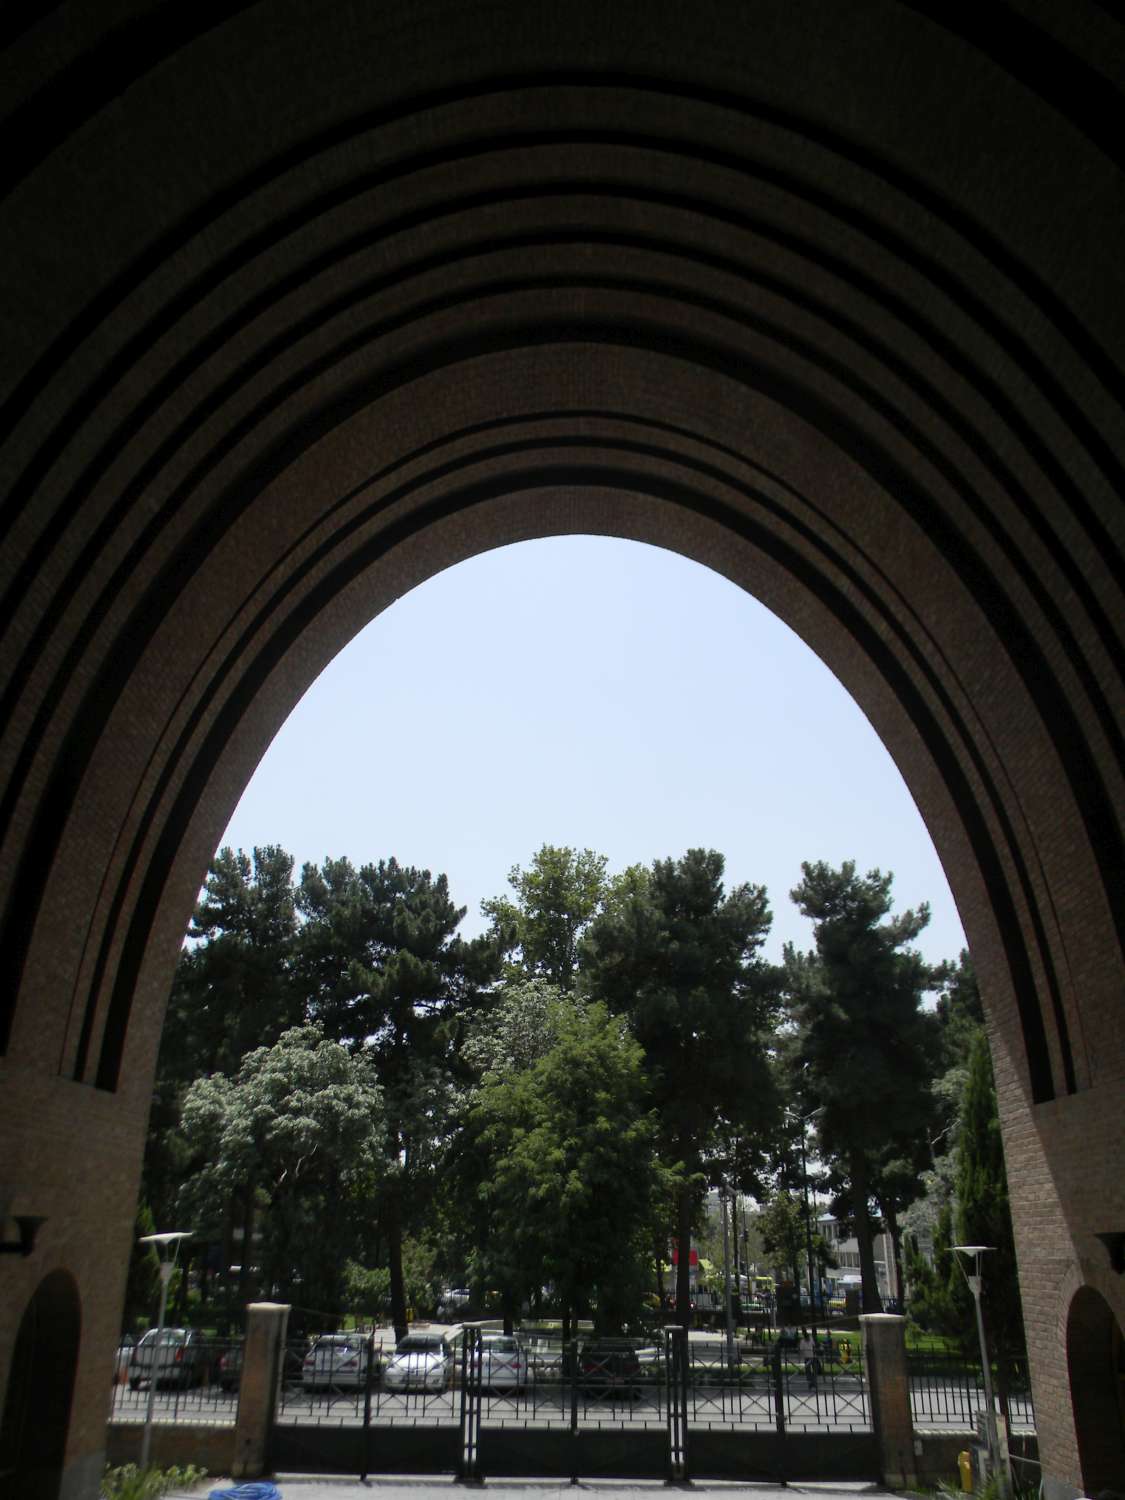 Entrance portal from inside arch.